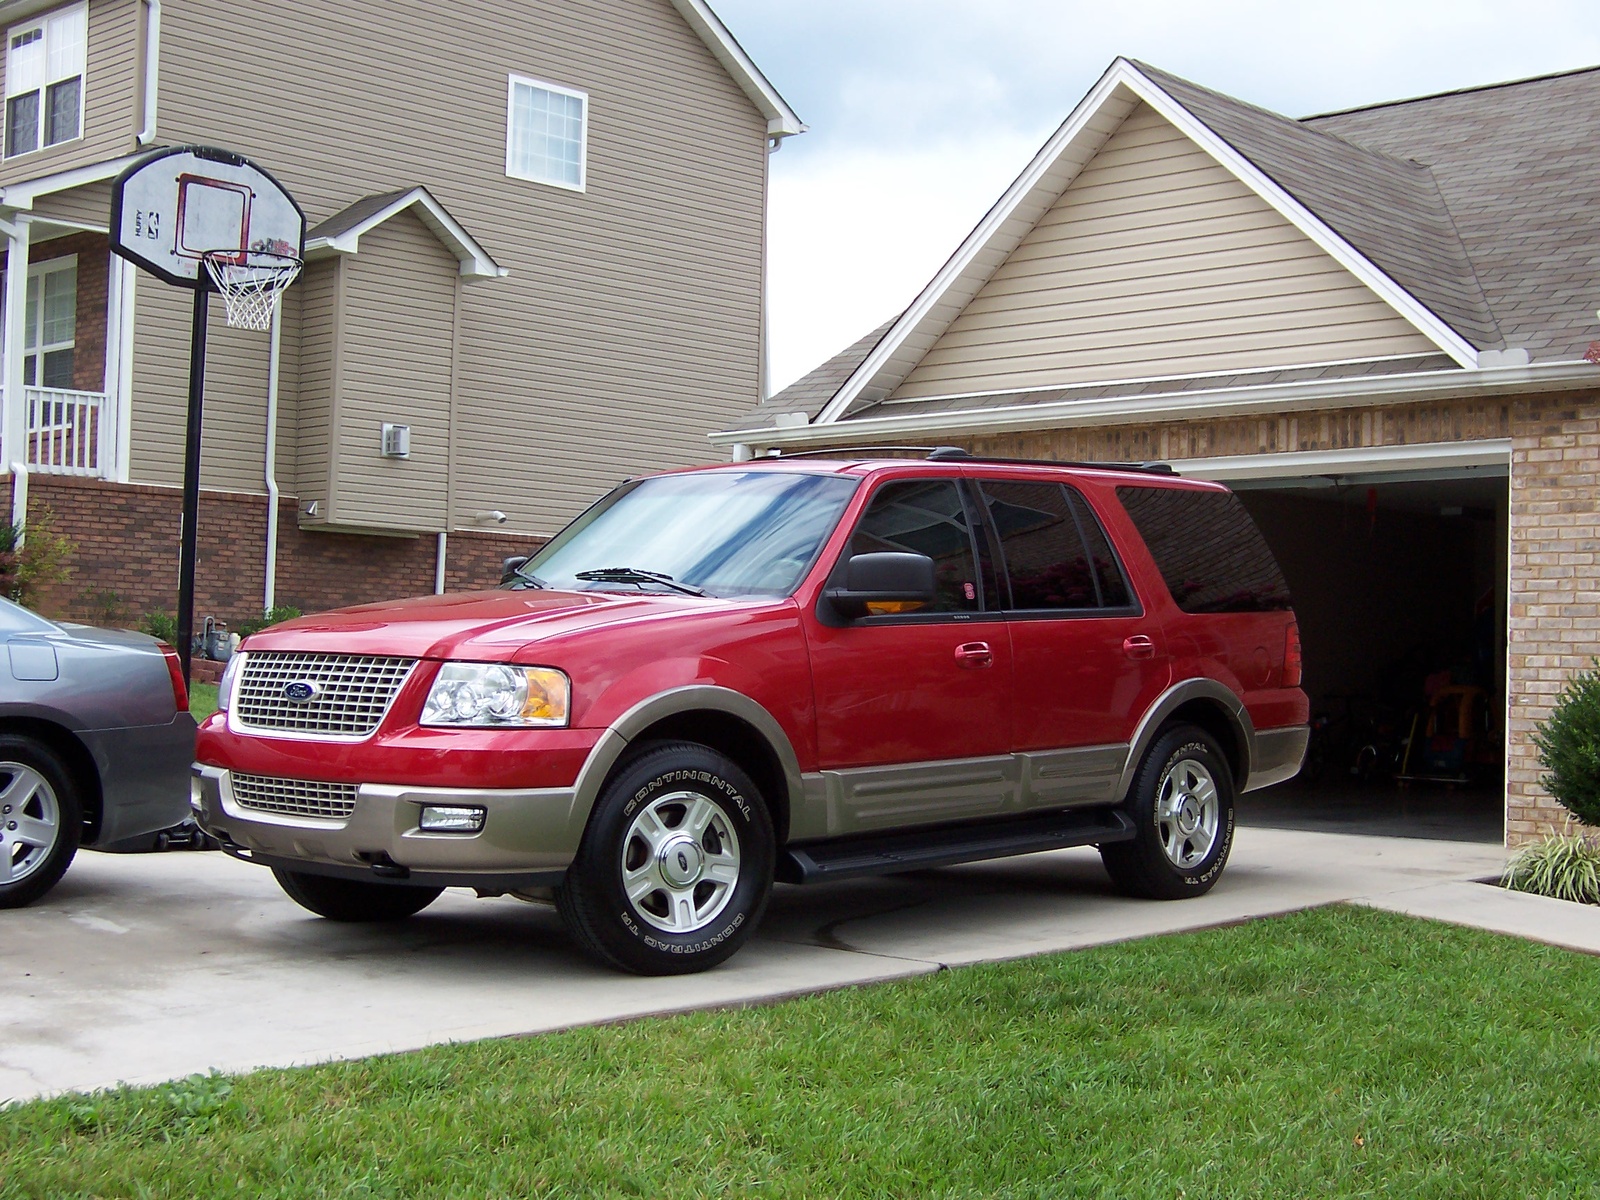 2003 Ford expedition eddie bauer specifications #2